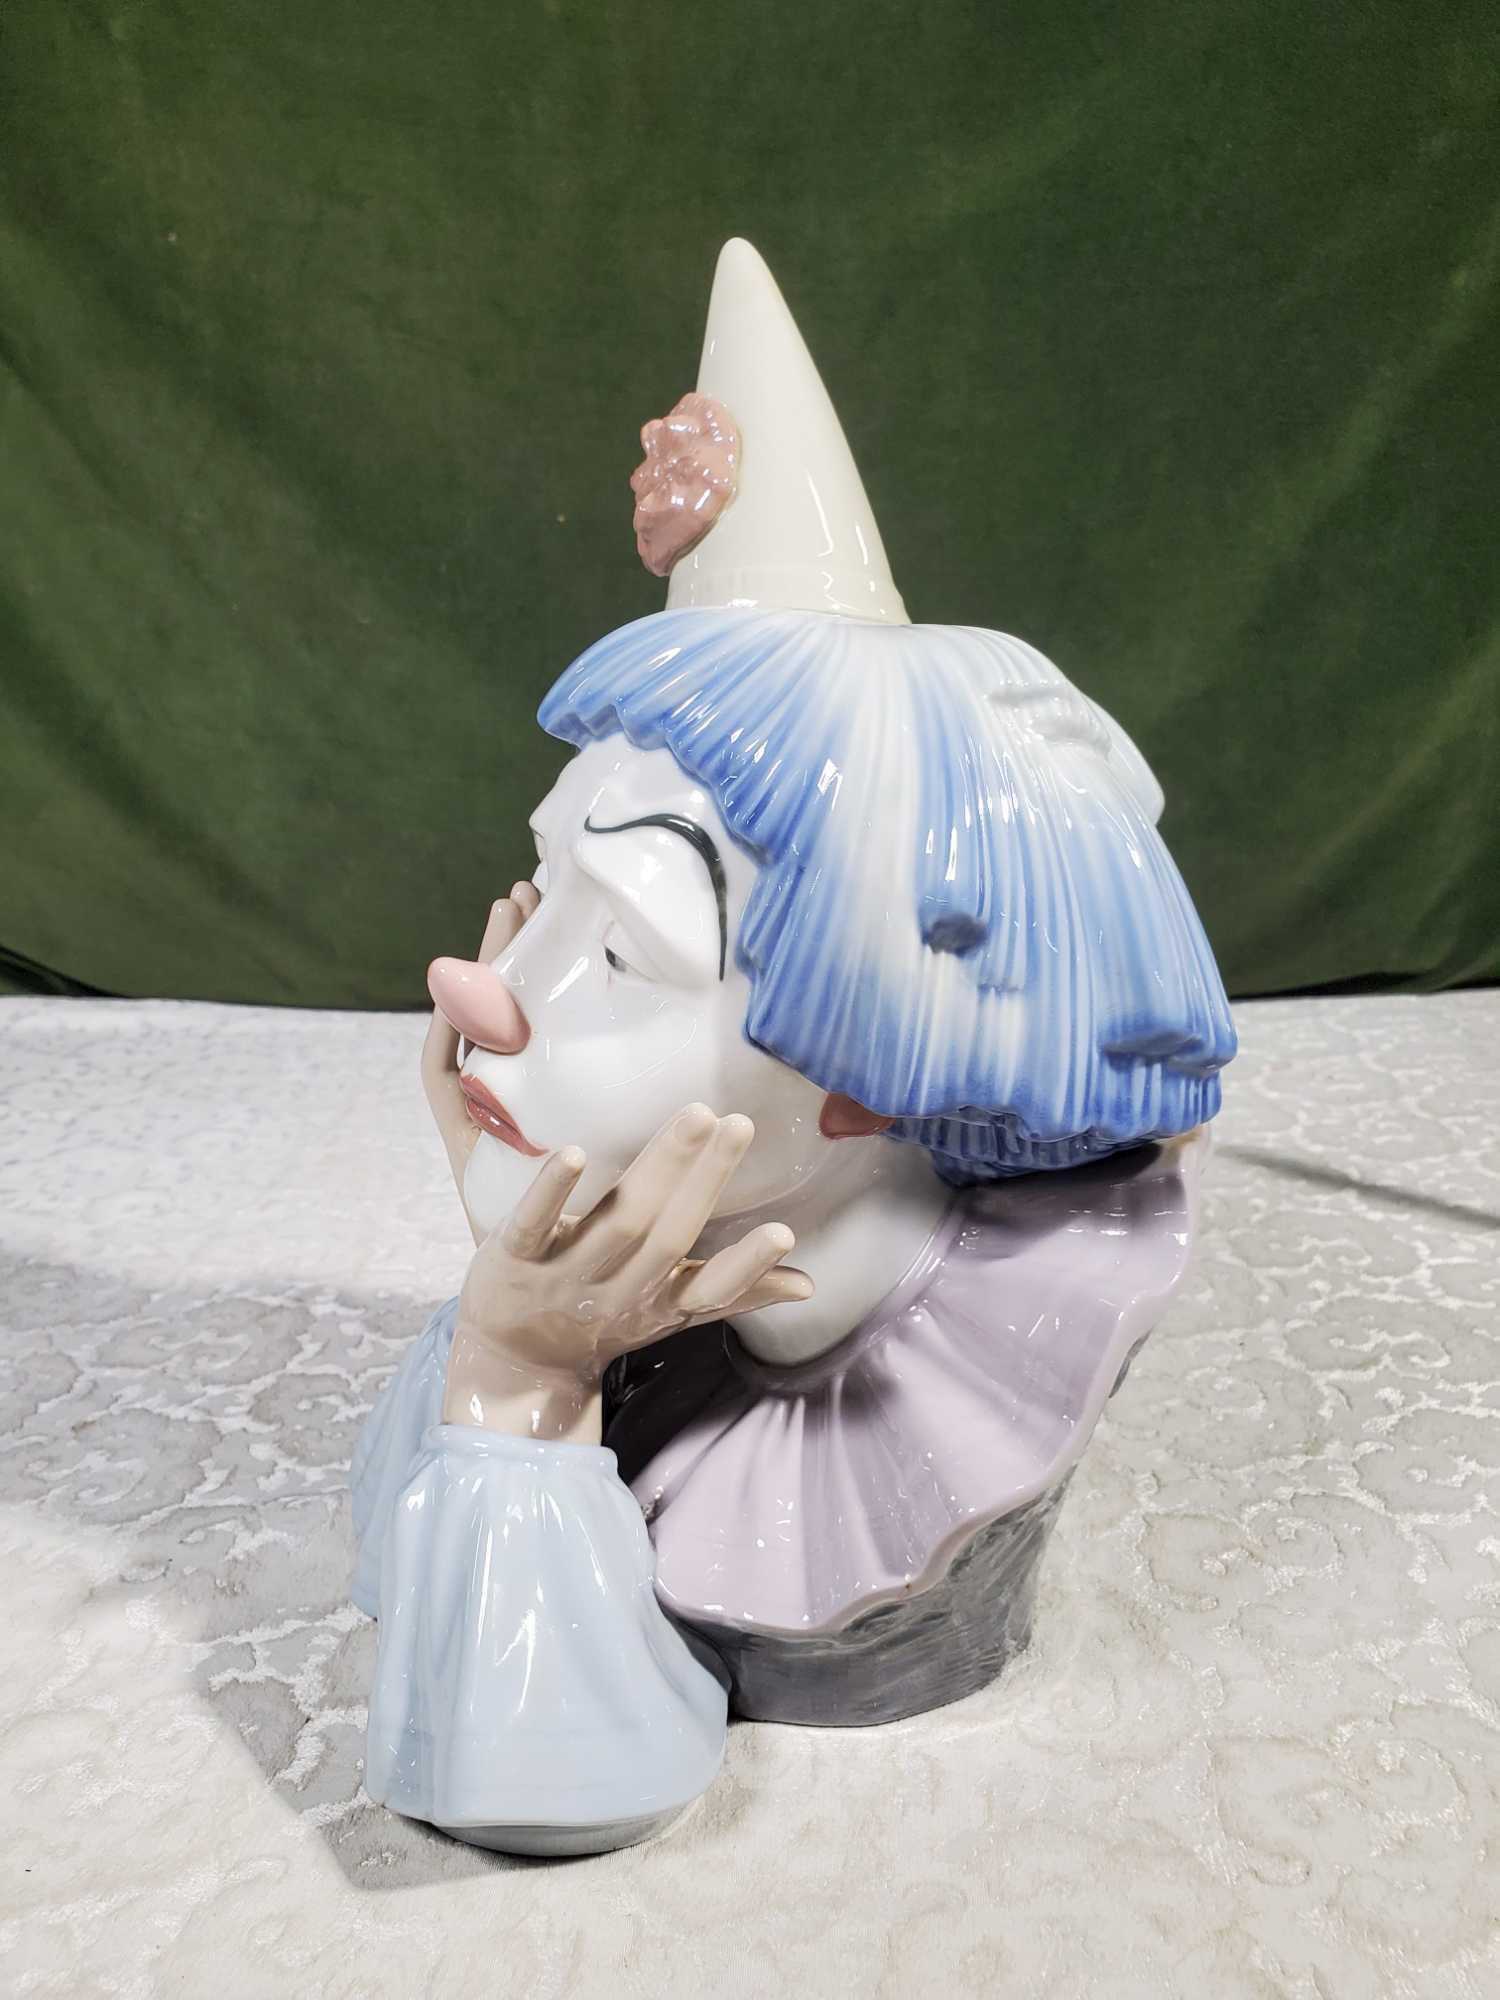 Clown Collectibles with Lladro Bust and Dancing Unicycle Clown Toy